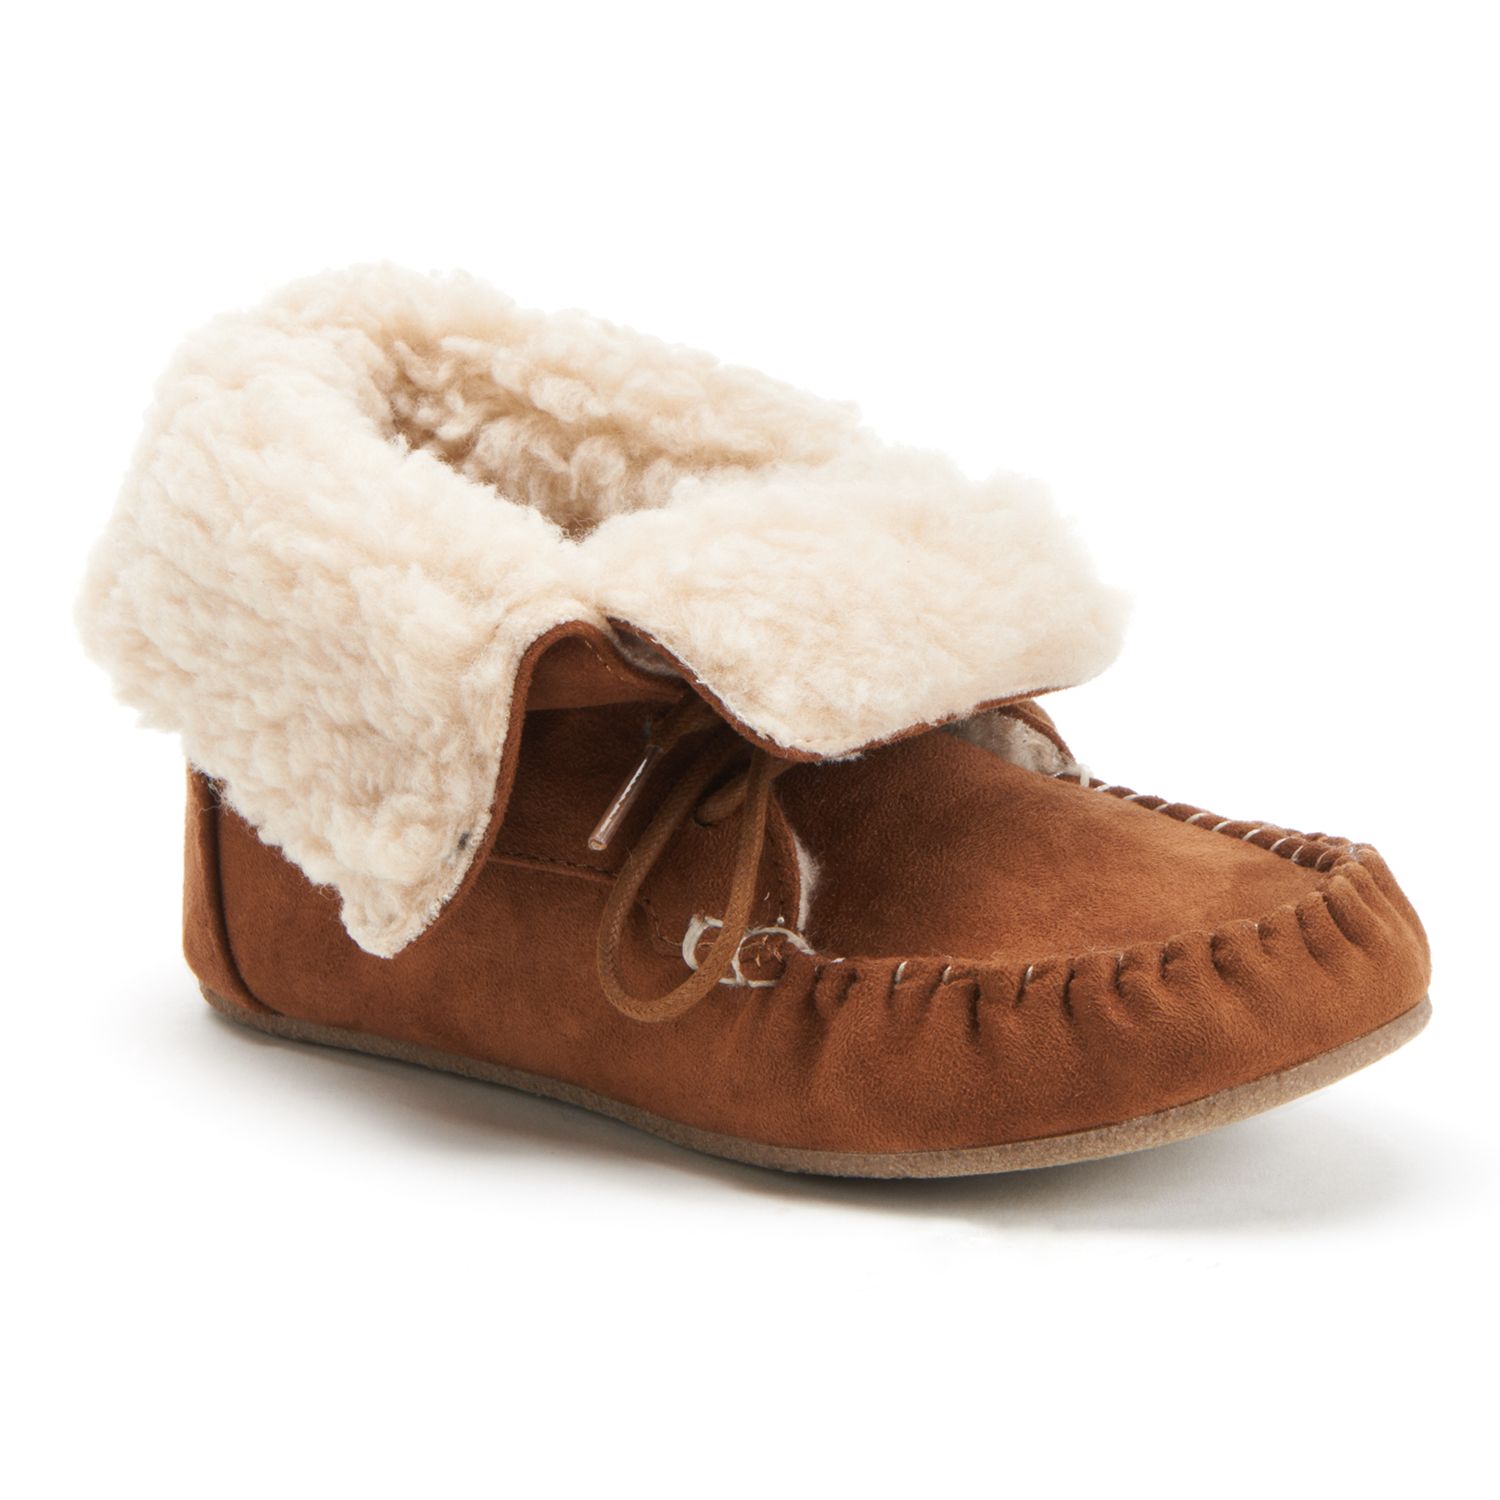 moccasins with fur inside